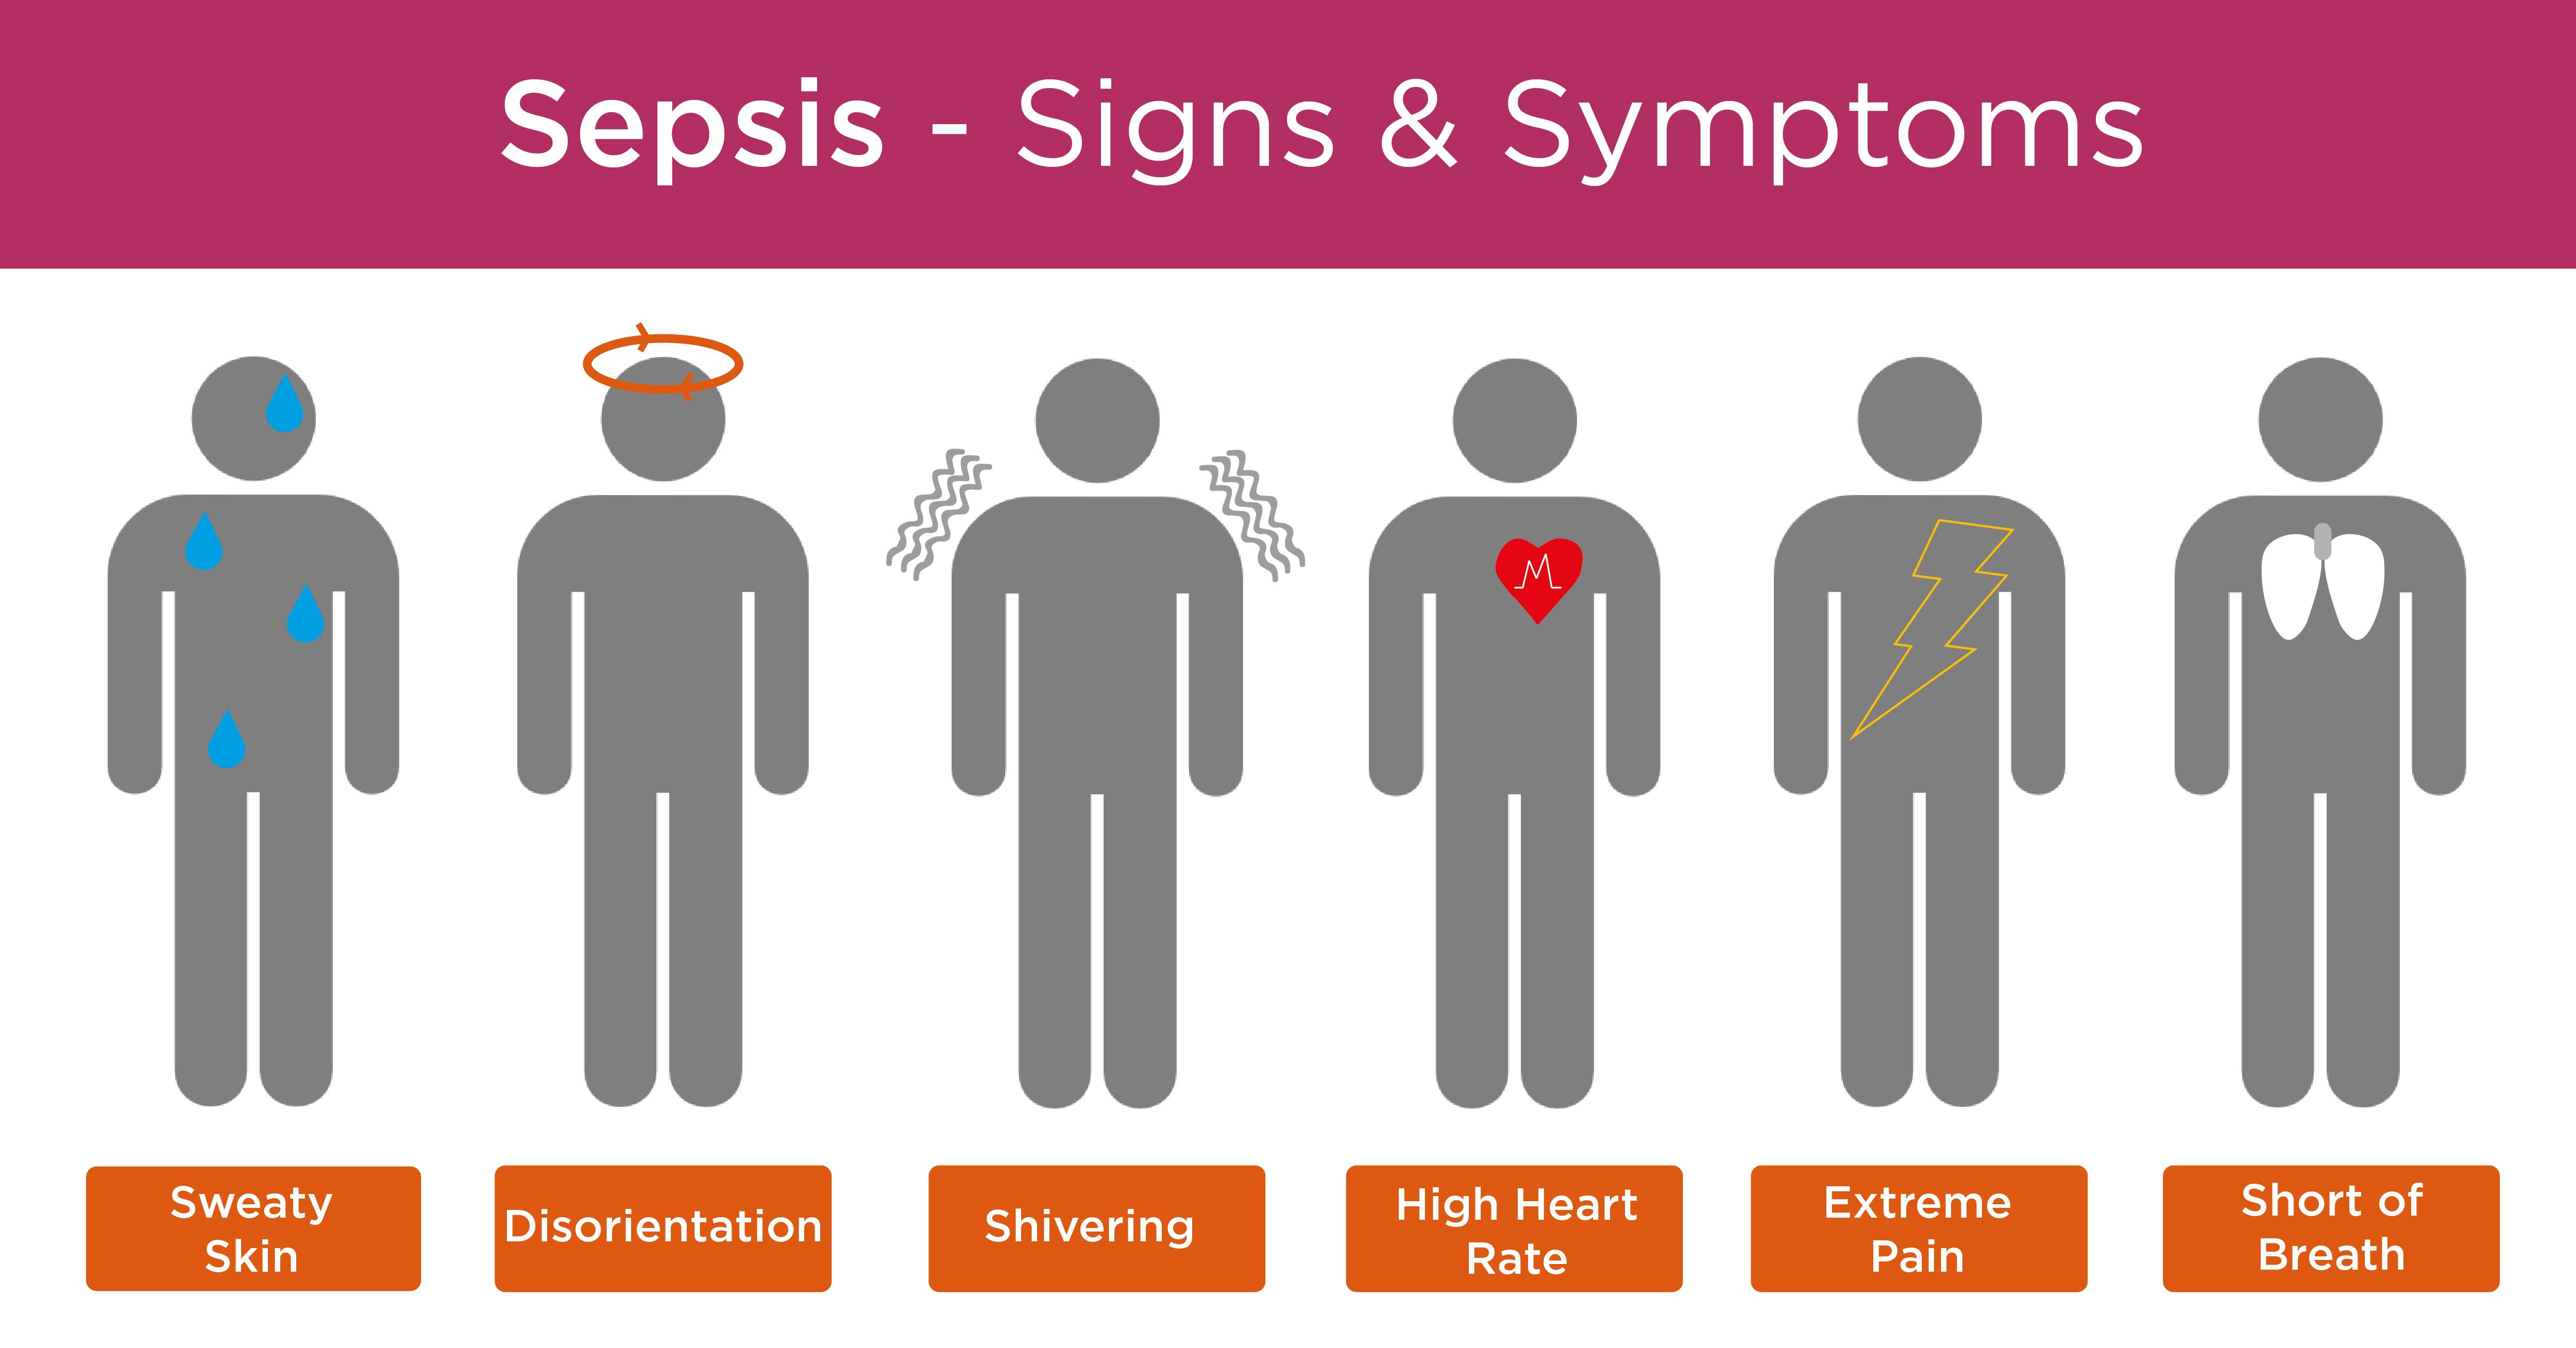 Sepsis - the signs and symptoms